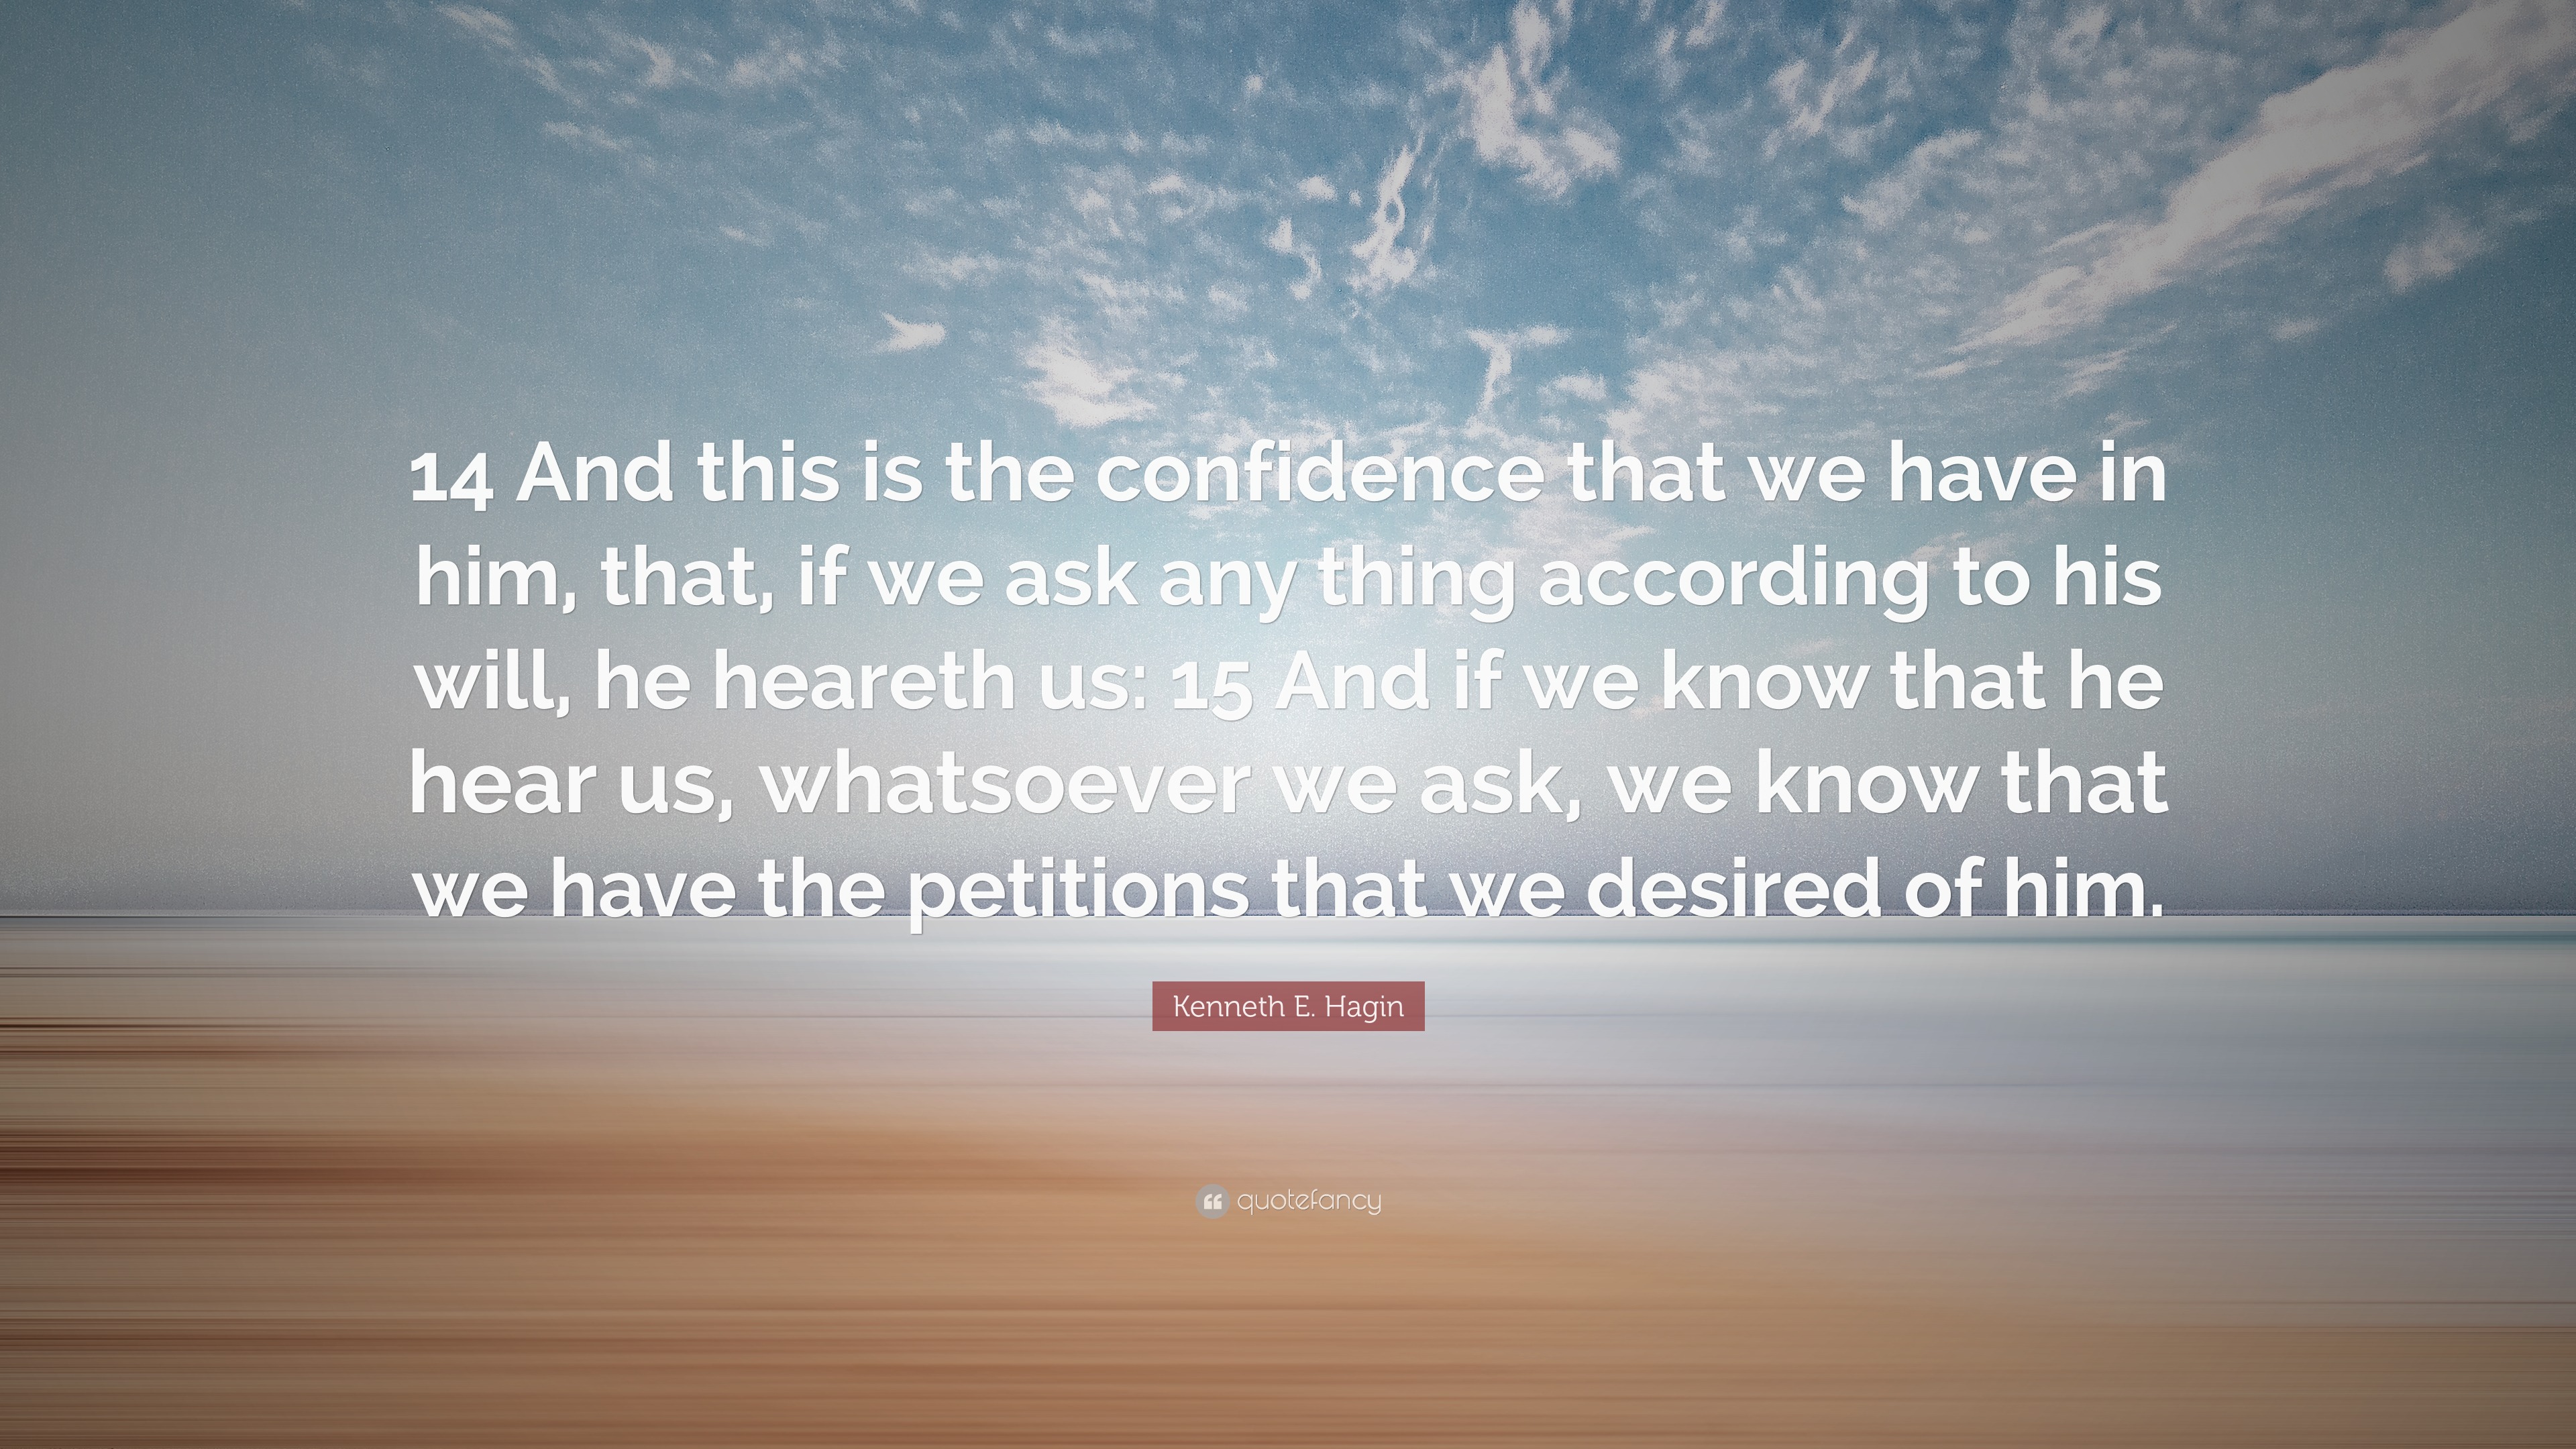 Kenneth E. Hagin Quote: “14 And This Is The Confidence That We Have In Him, That, If We Ask Any Thing According To His Will, He Heareth Us: 15 An...”